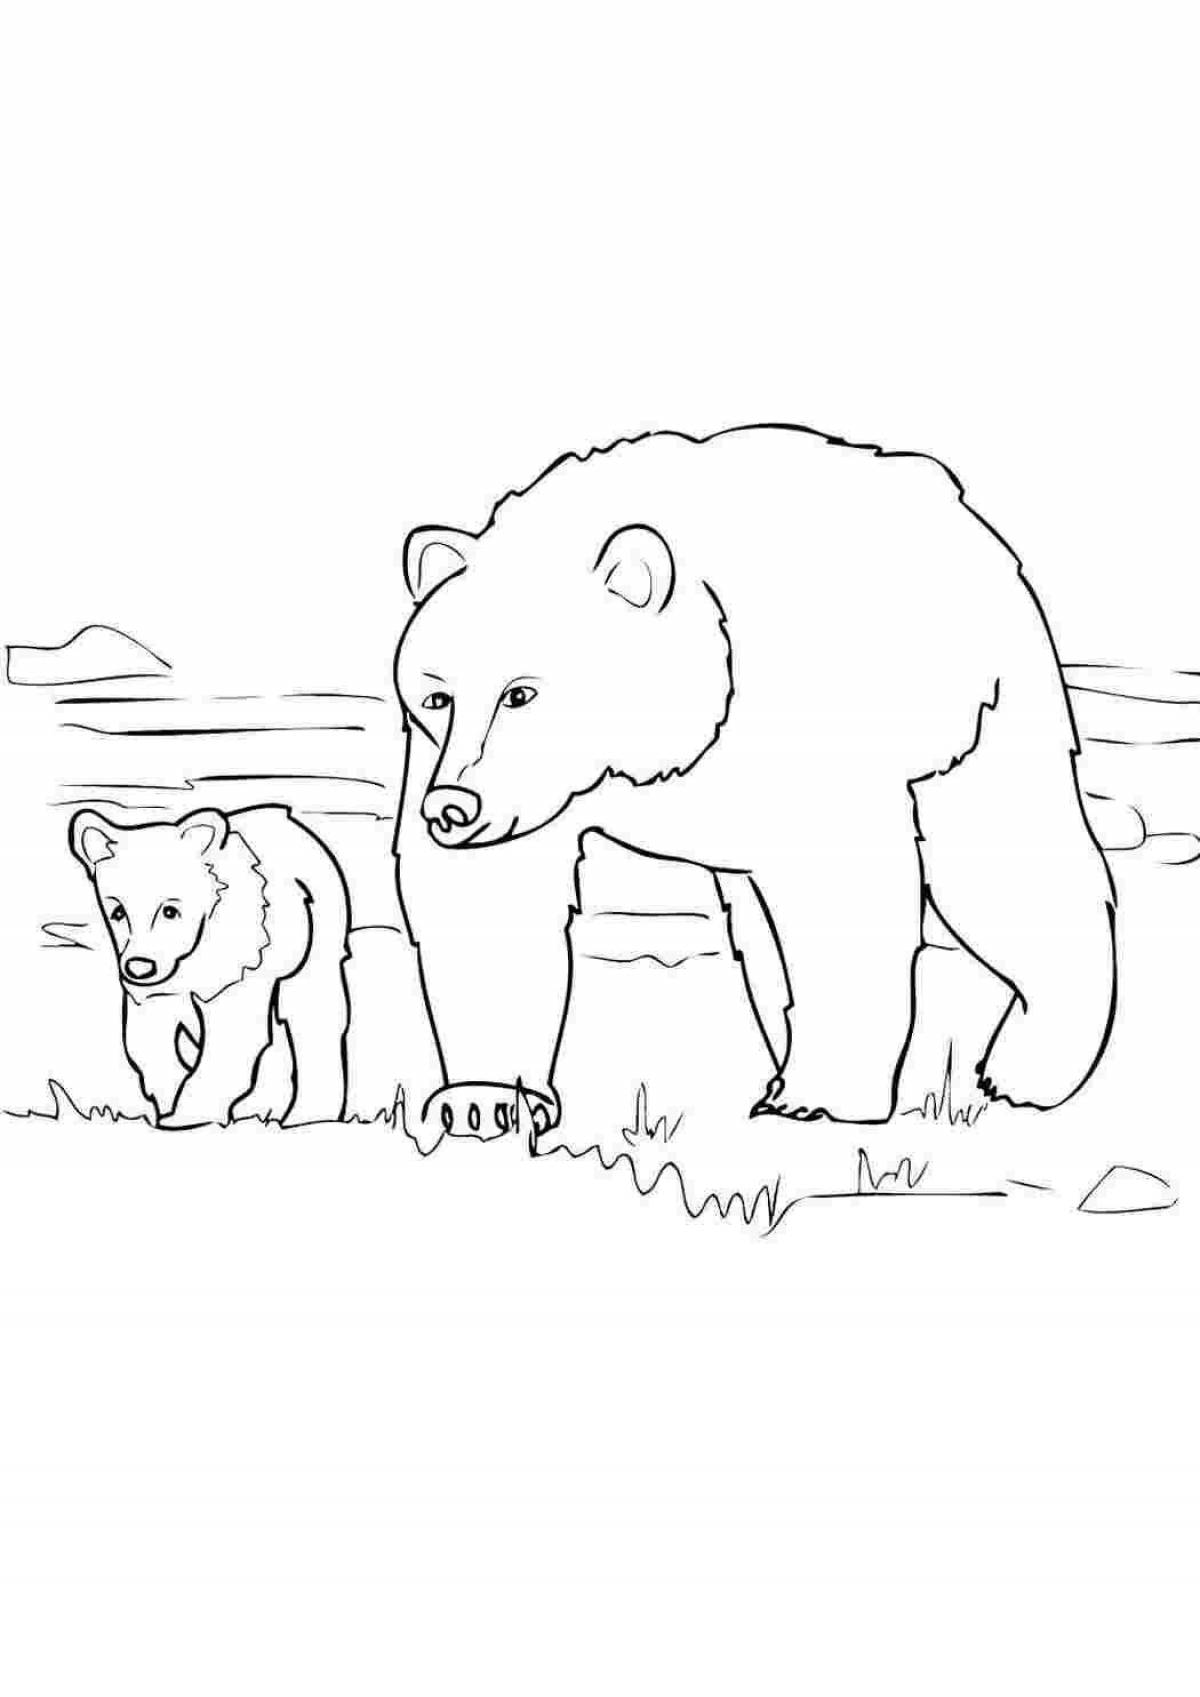 Coloring book calm bear in the forest